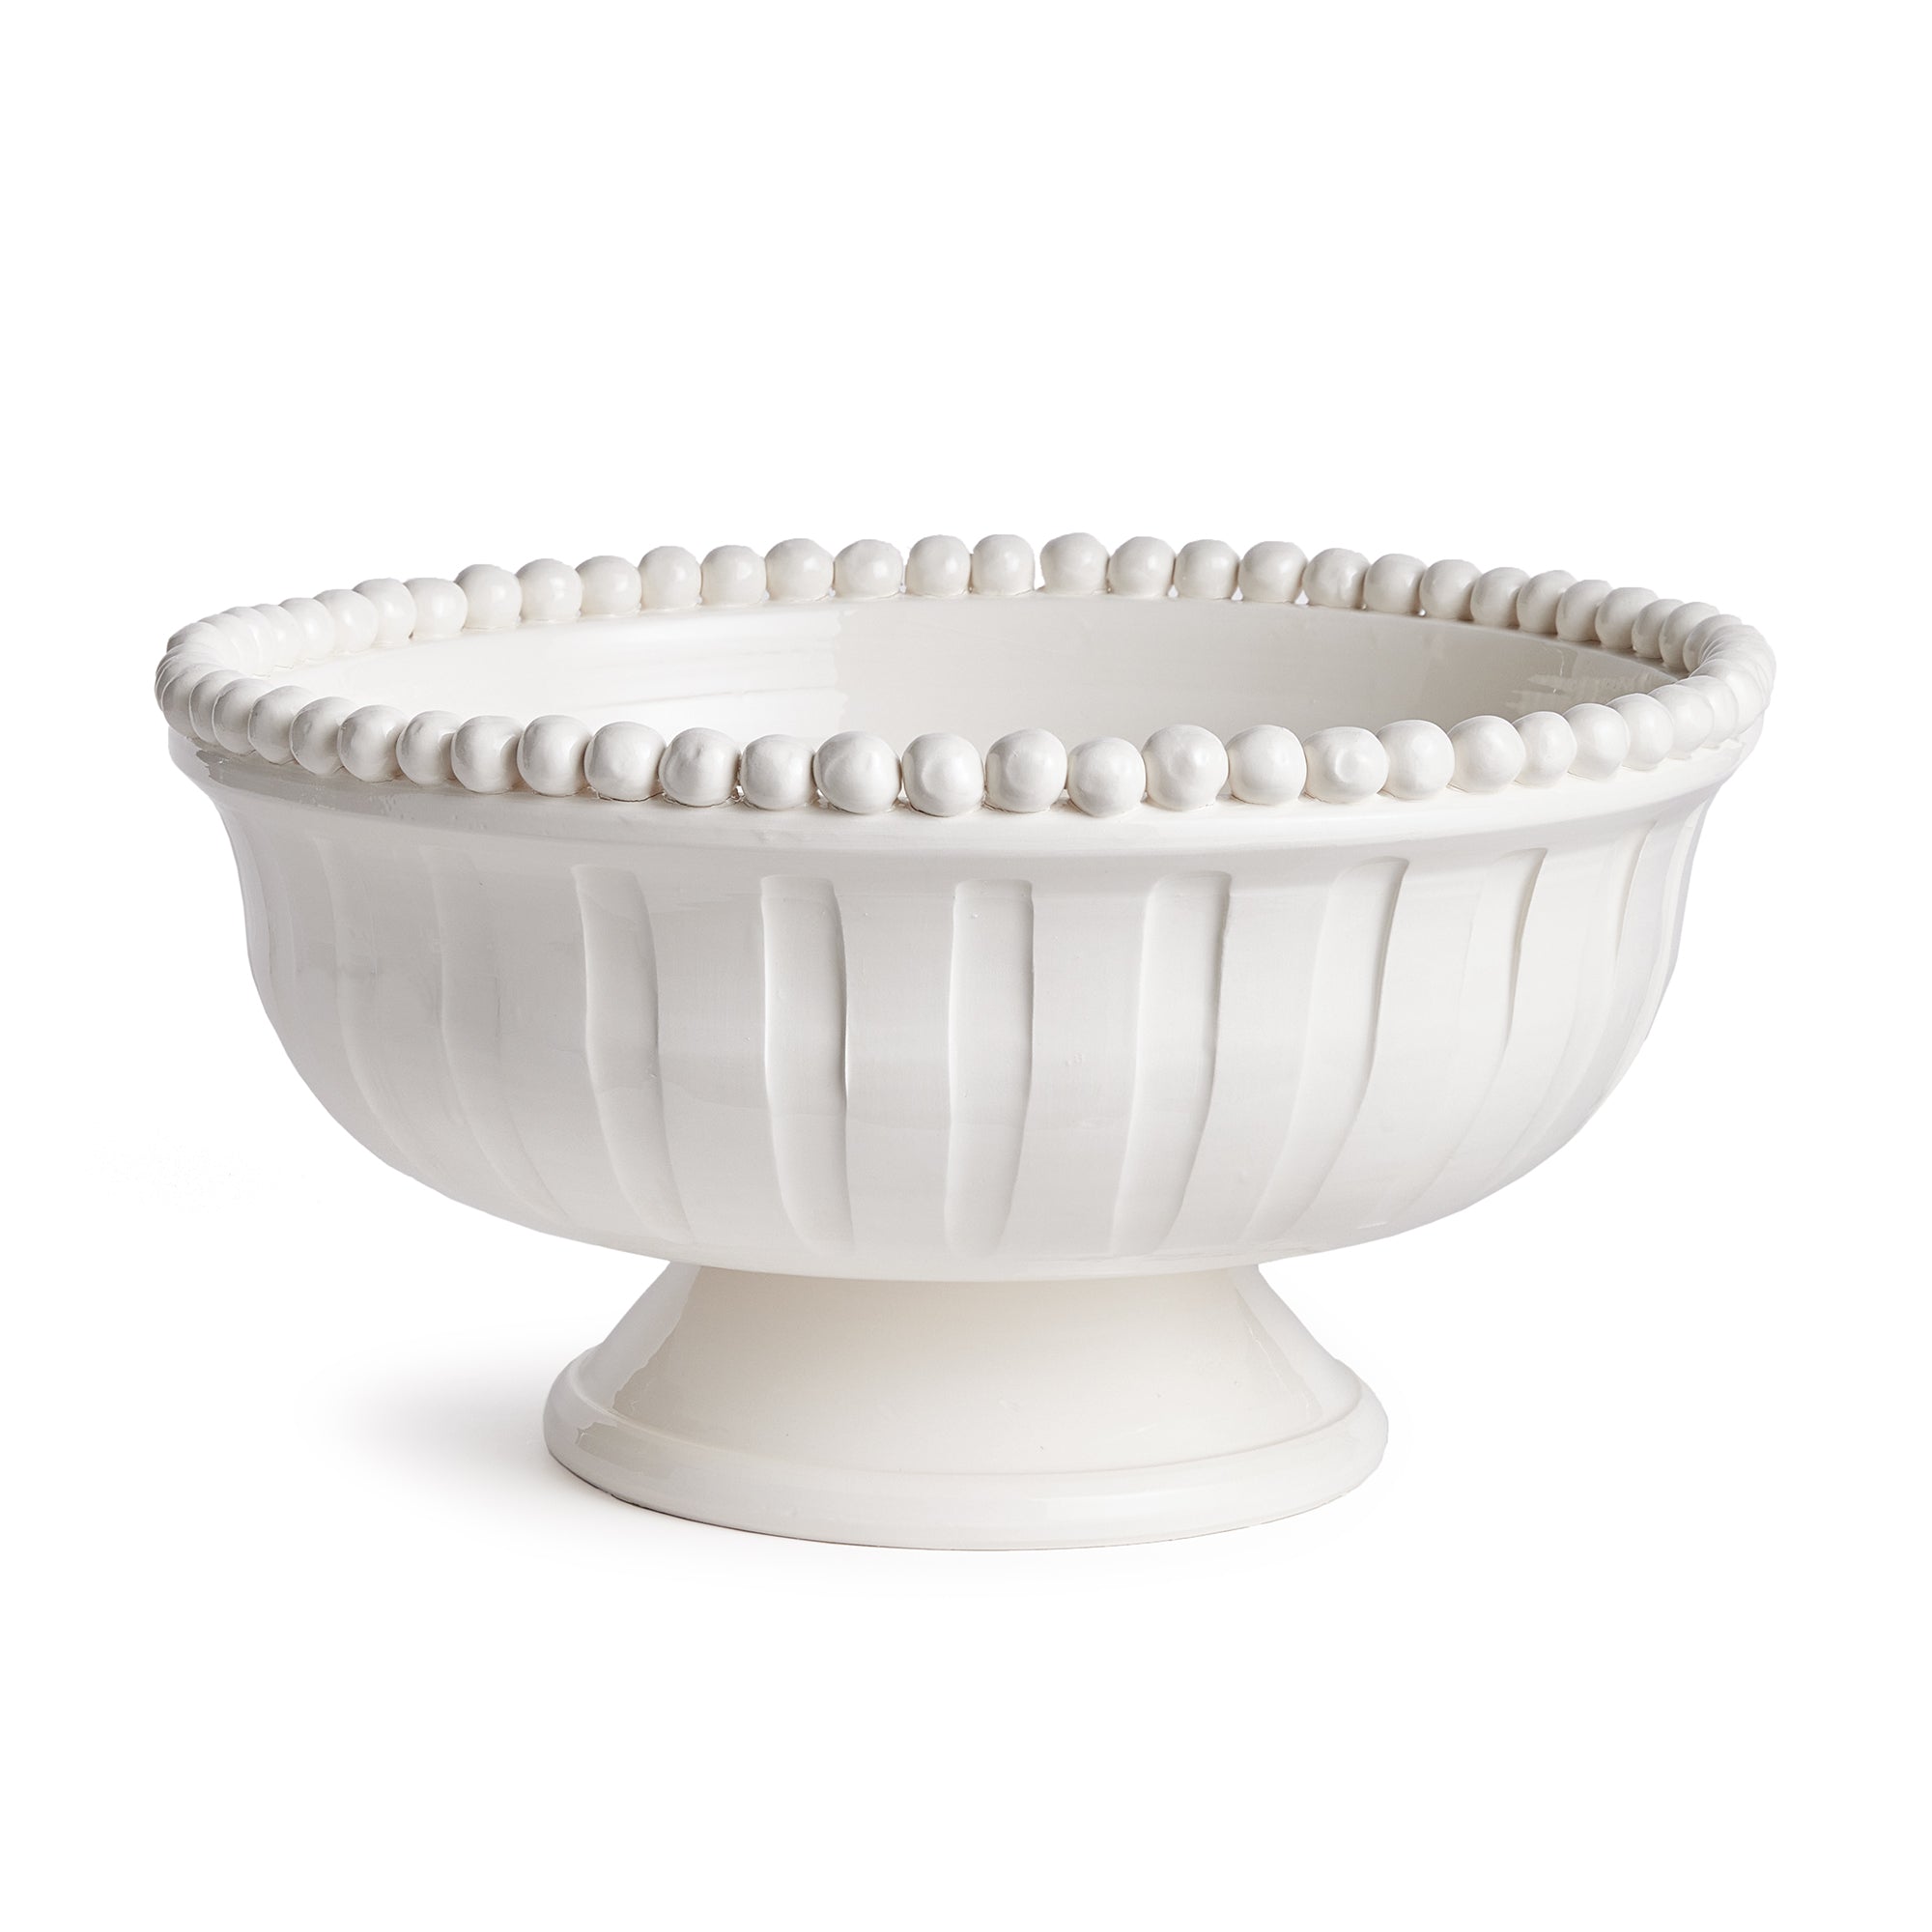 The Coletta Decorative Footed Low Bowl is handmade by Italian artisans in Tuscany, Italy. The subtle ribbing and hand-applied beading are made with genuine attention to detail. With a classic Italian craftsmanship passed down through generations, each piece is a true original. Amethyst Home provides interior design, new construction, custom furniture, and area rugs in the Houston metro area.